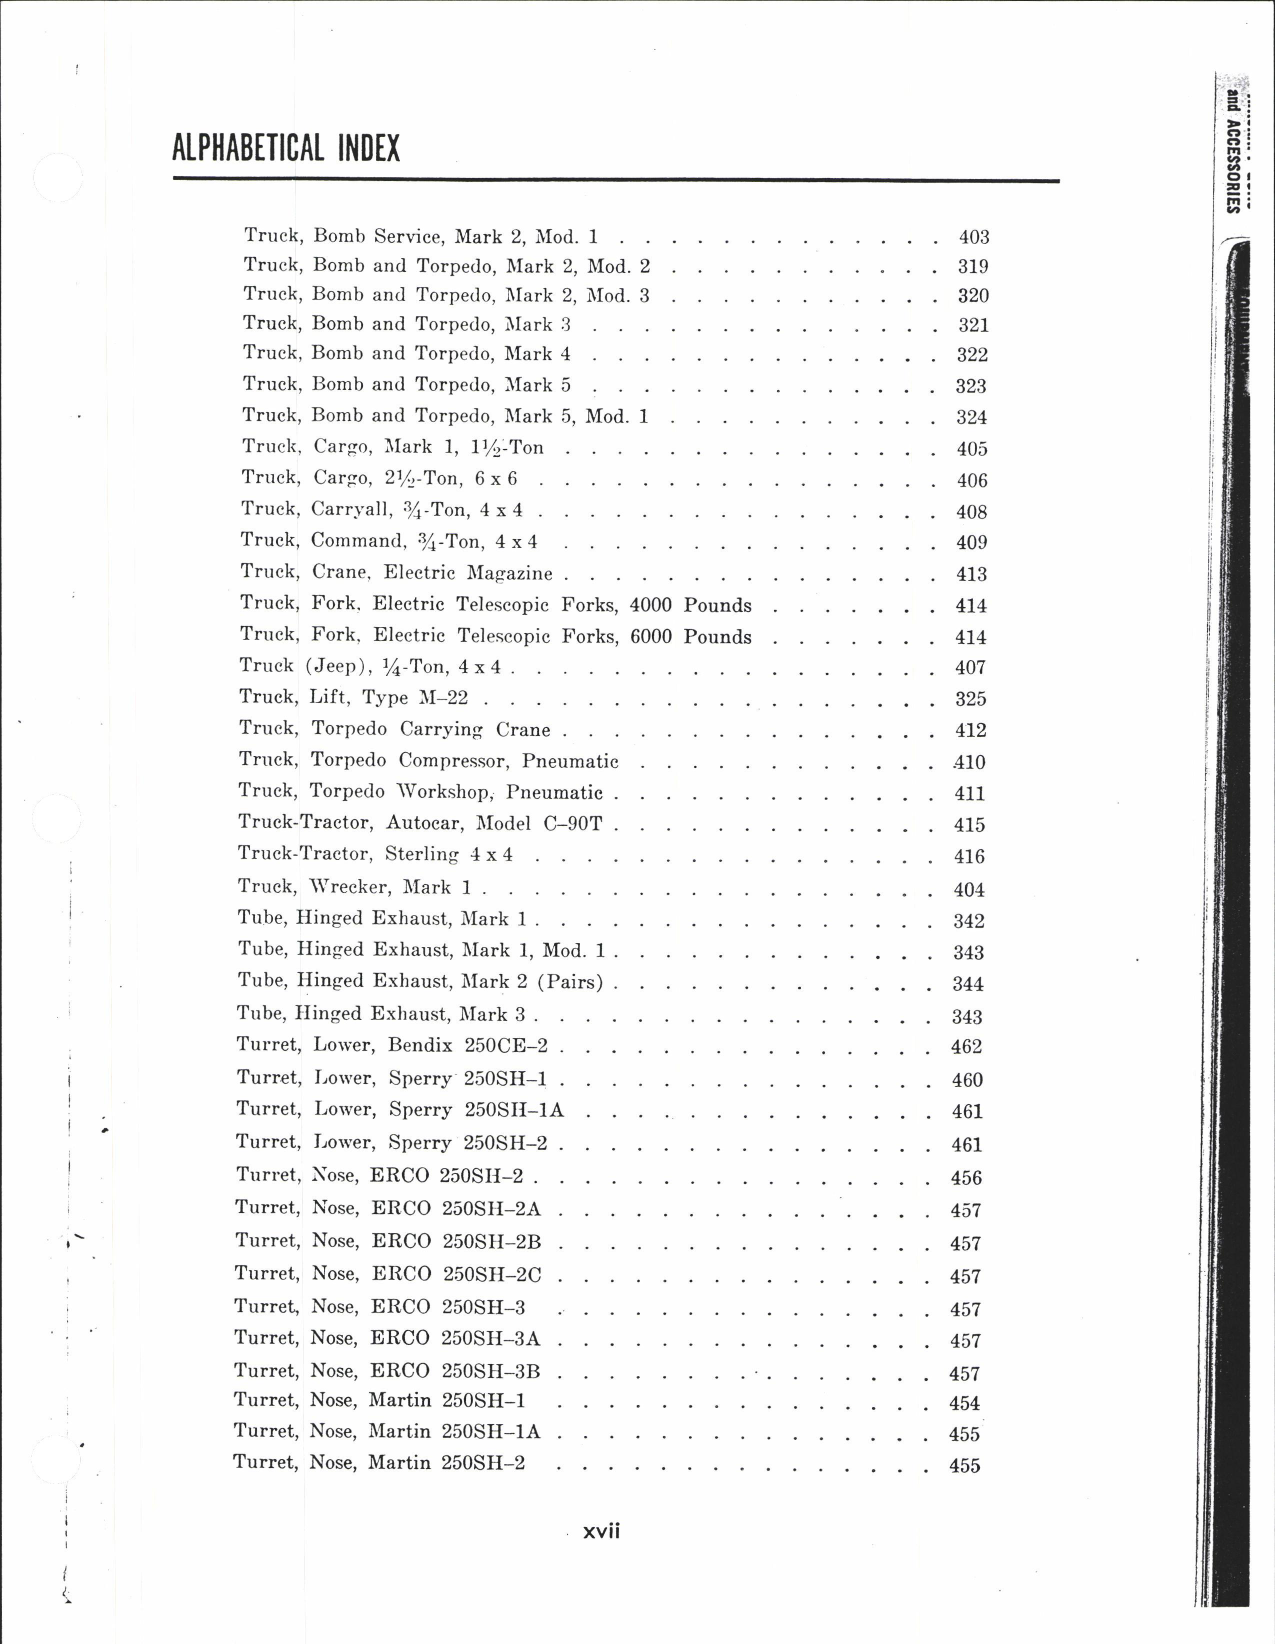 Sample page 5 from AirCorps Library document: Aviation Ordnance Equipment Catalogue for Aircraft Guns and Accessories